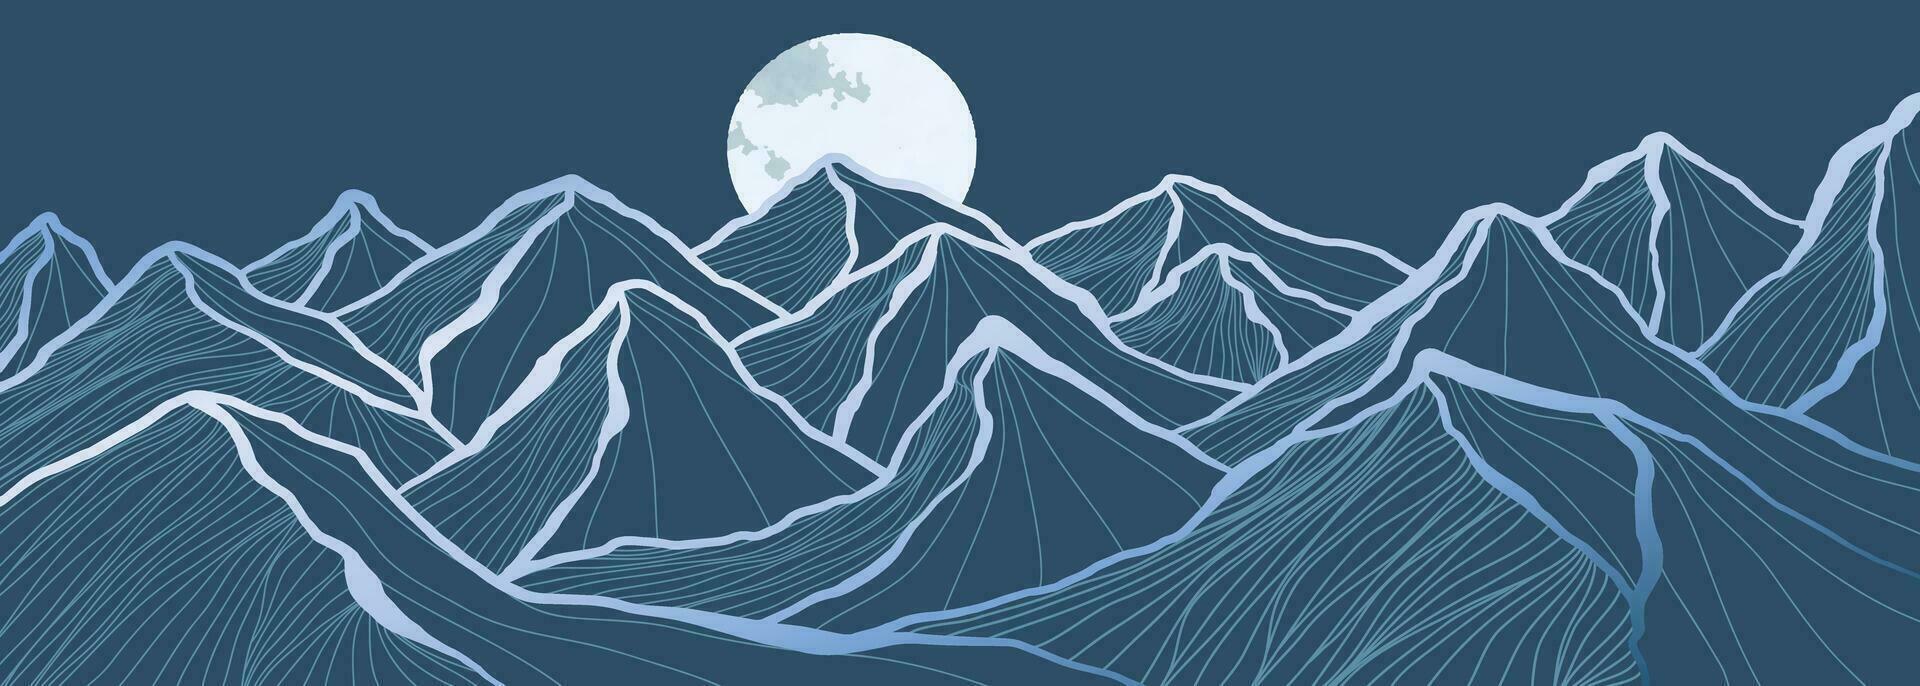 Mountain line art landscape illustration. Creative minimalist modern line art pattern. Abstract contemporary aesthetic backgrounds landscapes. with Mountain, hill and moonlight vector